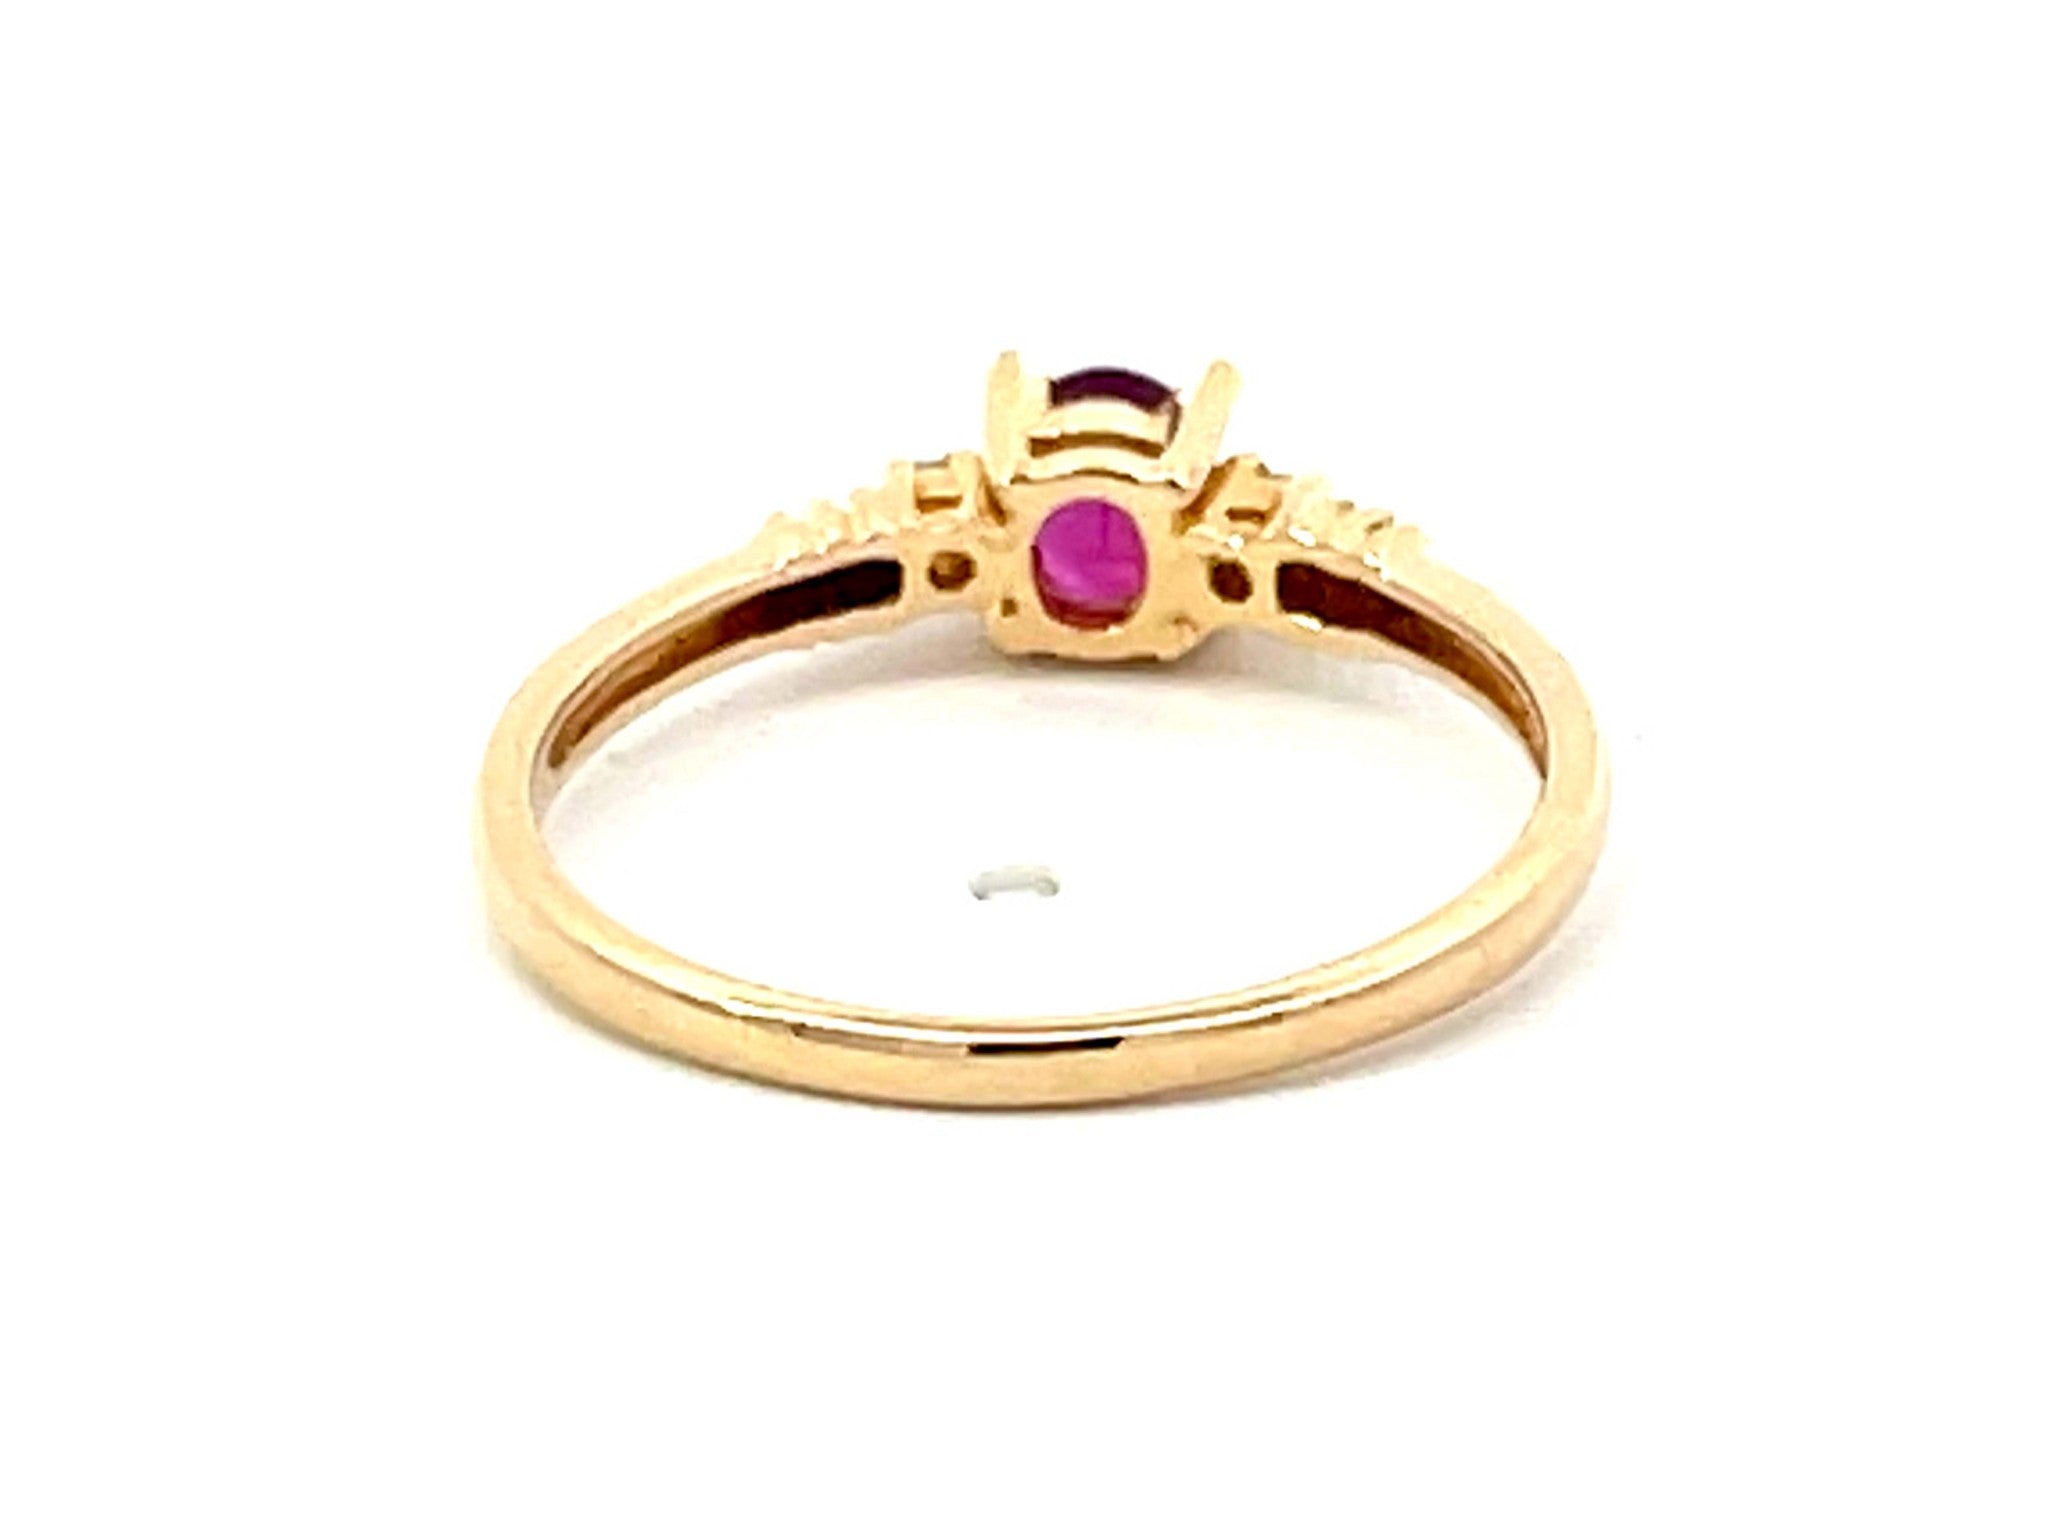 Oval Ruby Diamond Ring in 14k Yellow Gold